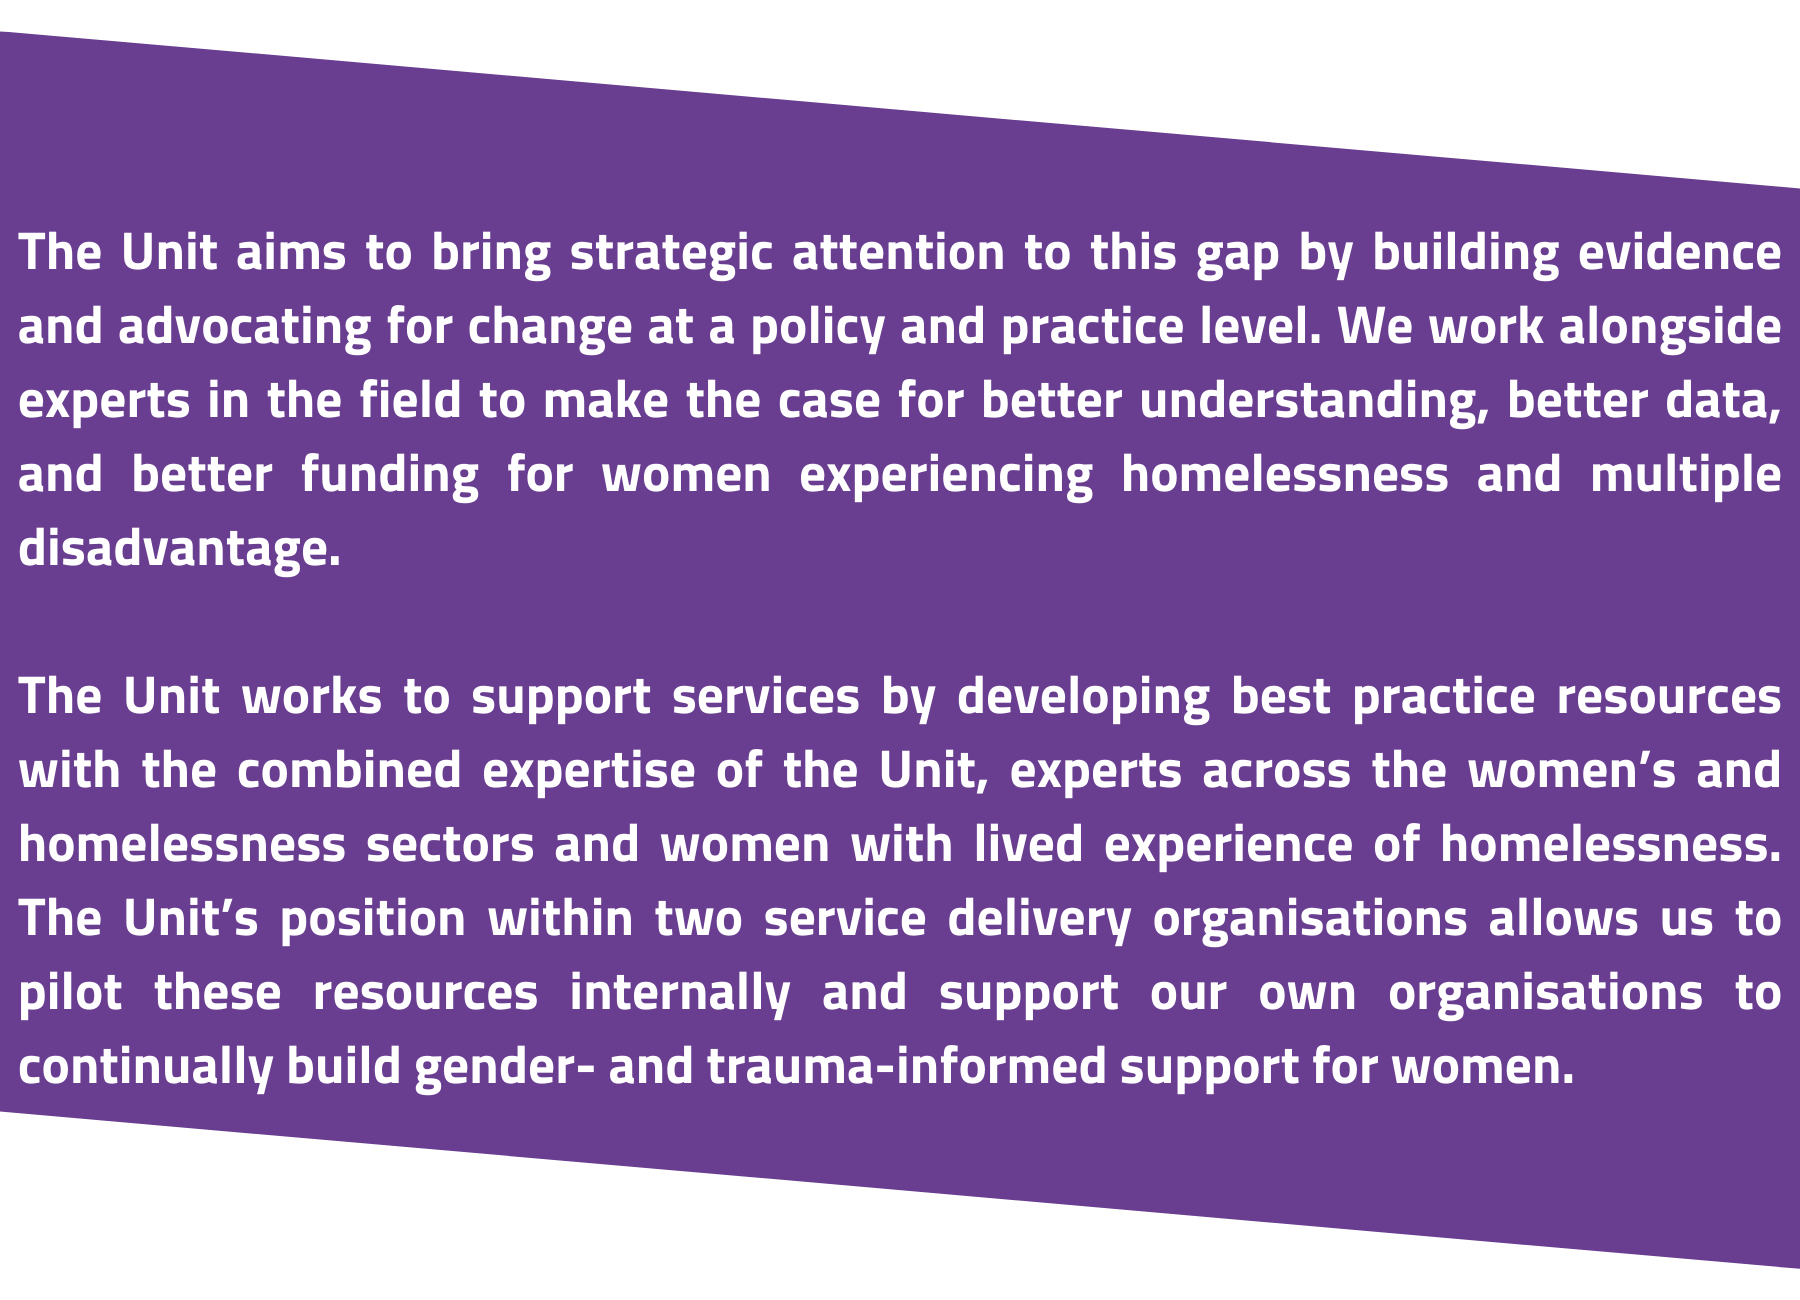 white text on purple background reads: The Unit aims to bring strategic attention to this gap by building evidence and advocating for change at a policy and practice level. We work alongside experts in the field to make the case for better understanding, better data, and better funding for women experiencing homelessness and multiple disadvantage.

The Unit worked to support services by developing best practice resources with the combined expertise of the Unit, experts across the women’s and homelessness sectors and women with lived experience of homelessness. The Unit’s position within two service delivery organisations allows us to pilot these resources internally and support our own organisations to continually build gender- and trauma-informed support for women.